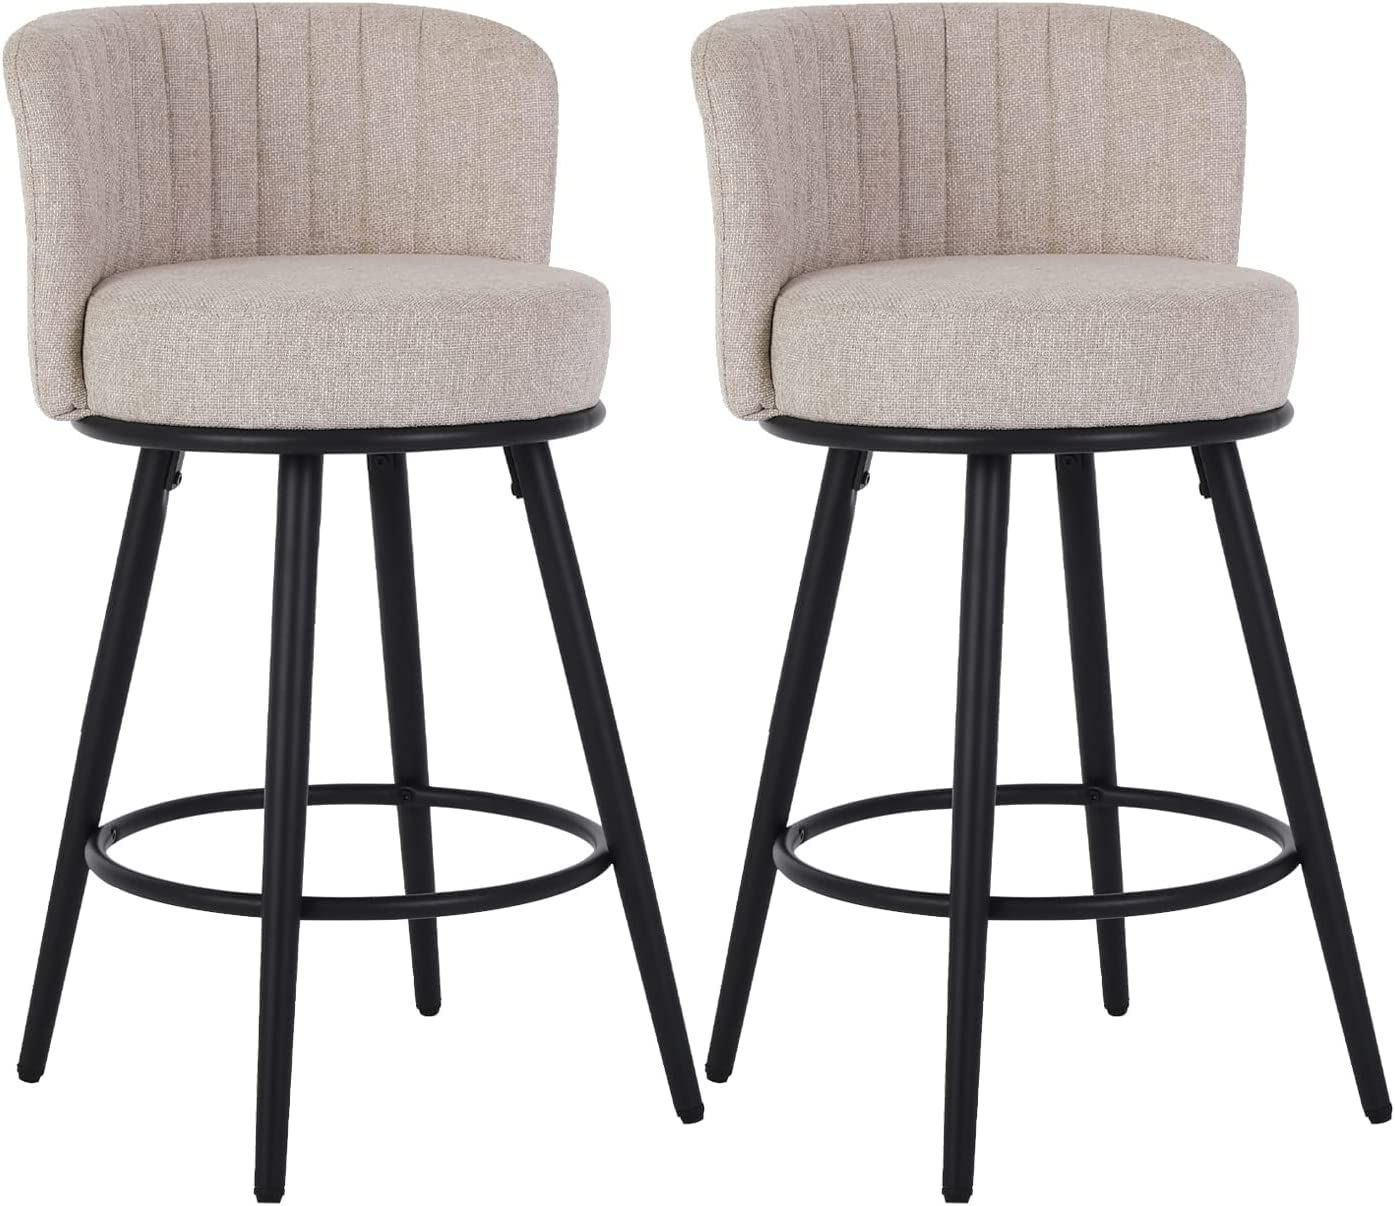 Czlolo Bar Stools Set of 2, 27 Inches Seat Height Barstools, Upholstered Linen Fabric Counter Hei... | Amazon (US)